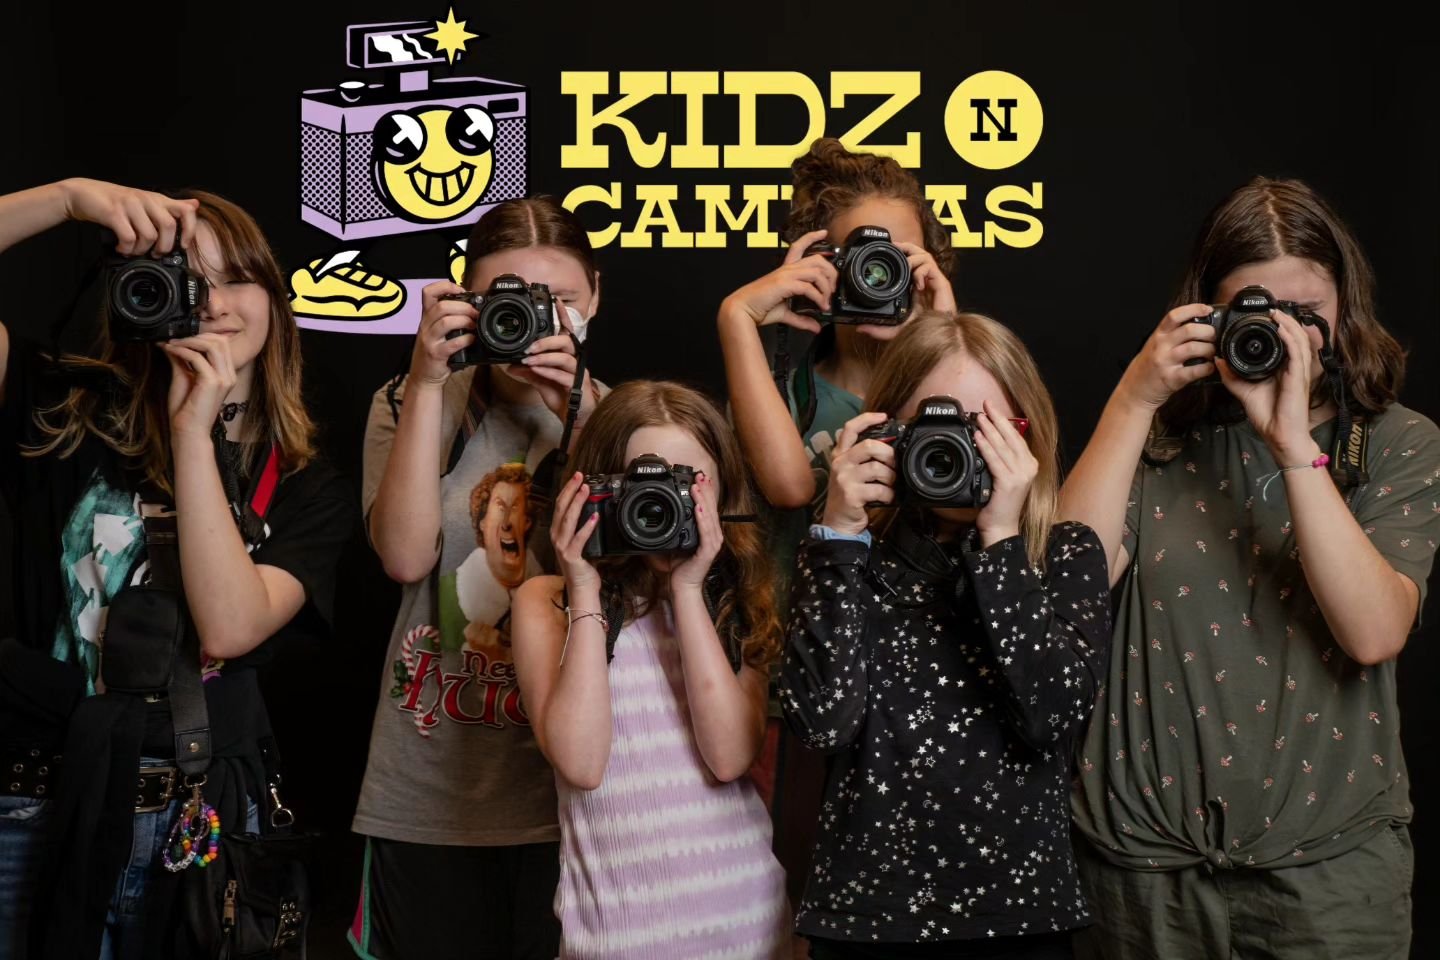 Today, we had an amazing workshop in collaboration with the Fayetteville Public Library! Kids learned about composition, capturing emotions, and lighting in photography. Exciting news: We have three summer camps coming up with Crystal Bridges! Check 